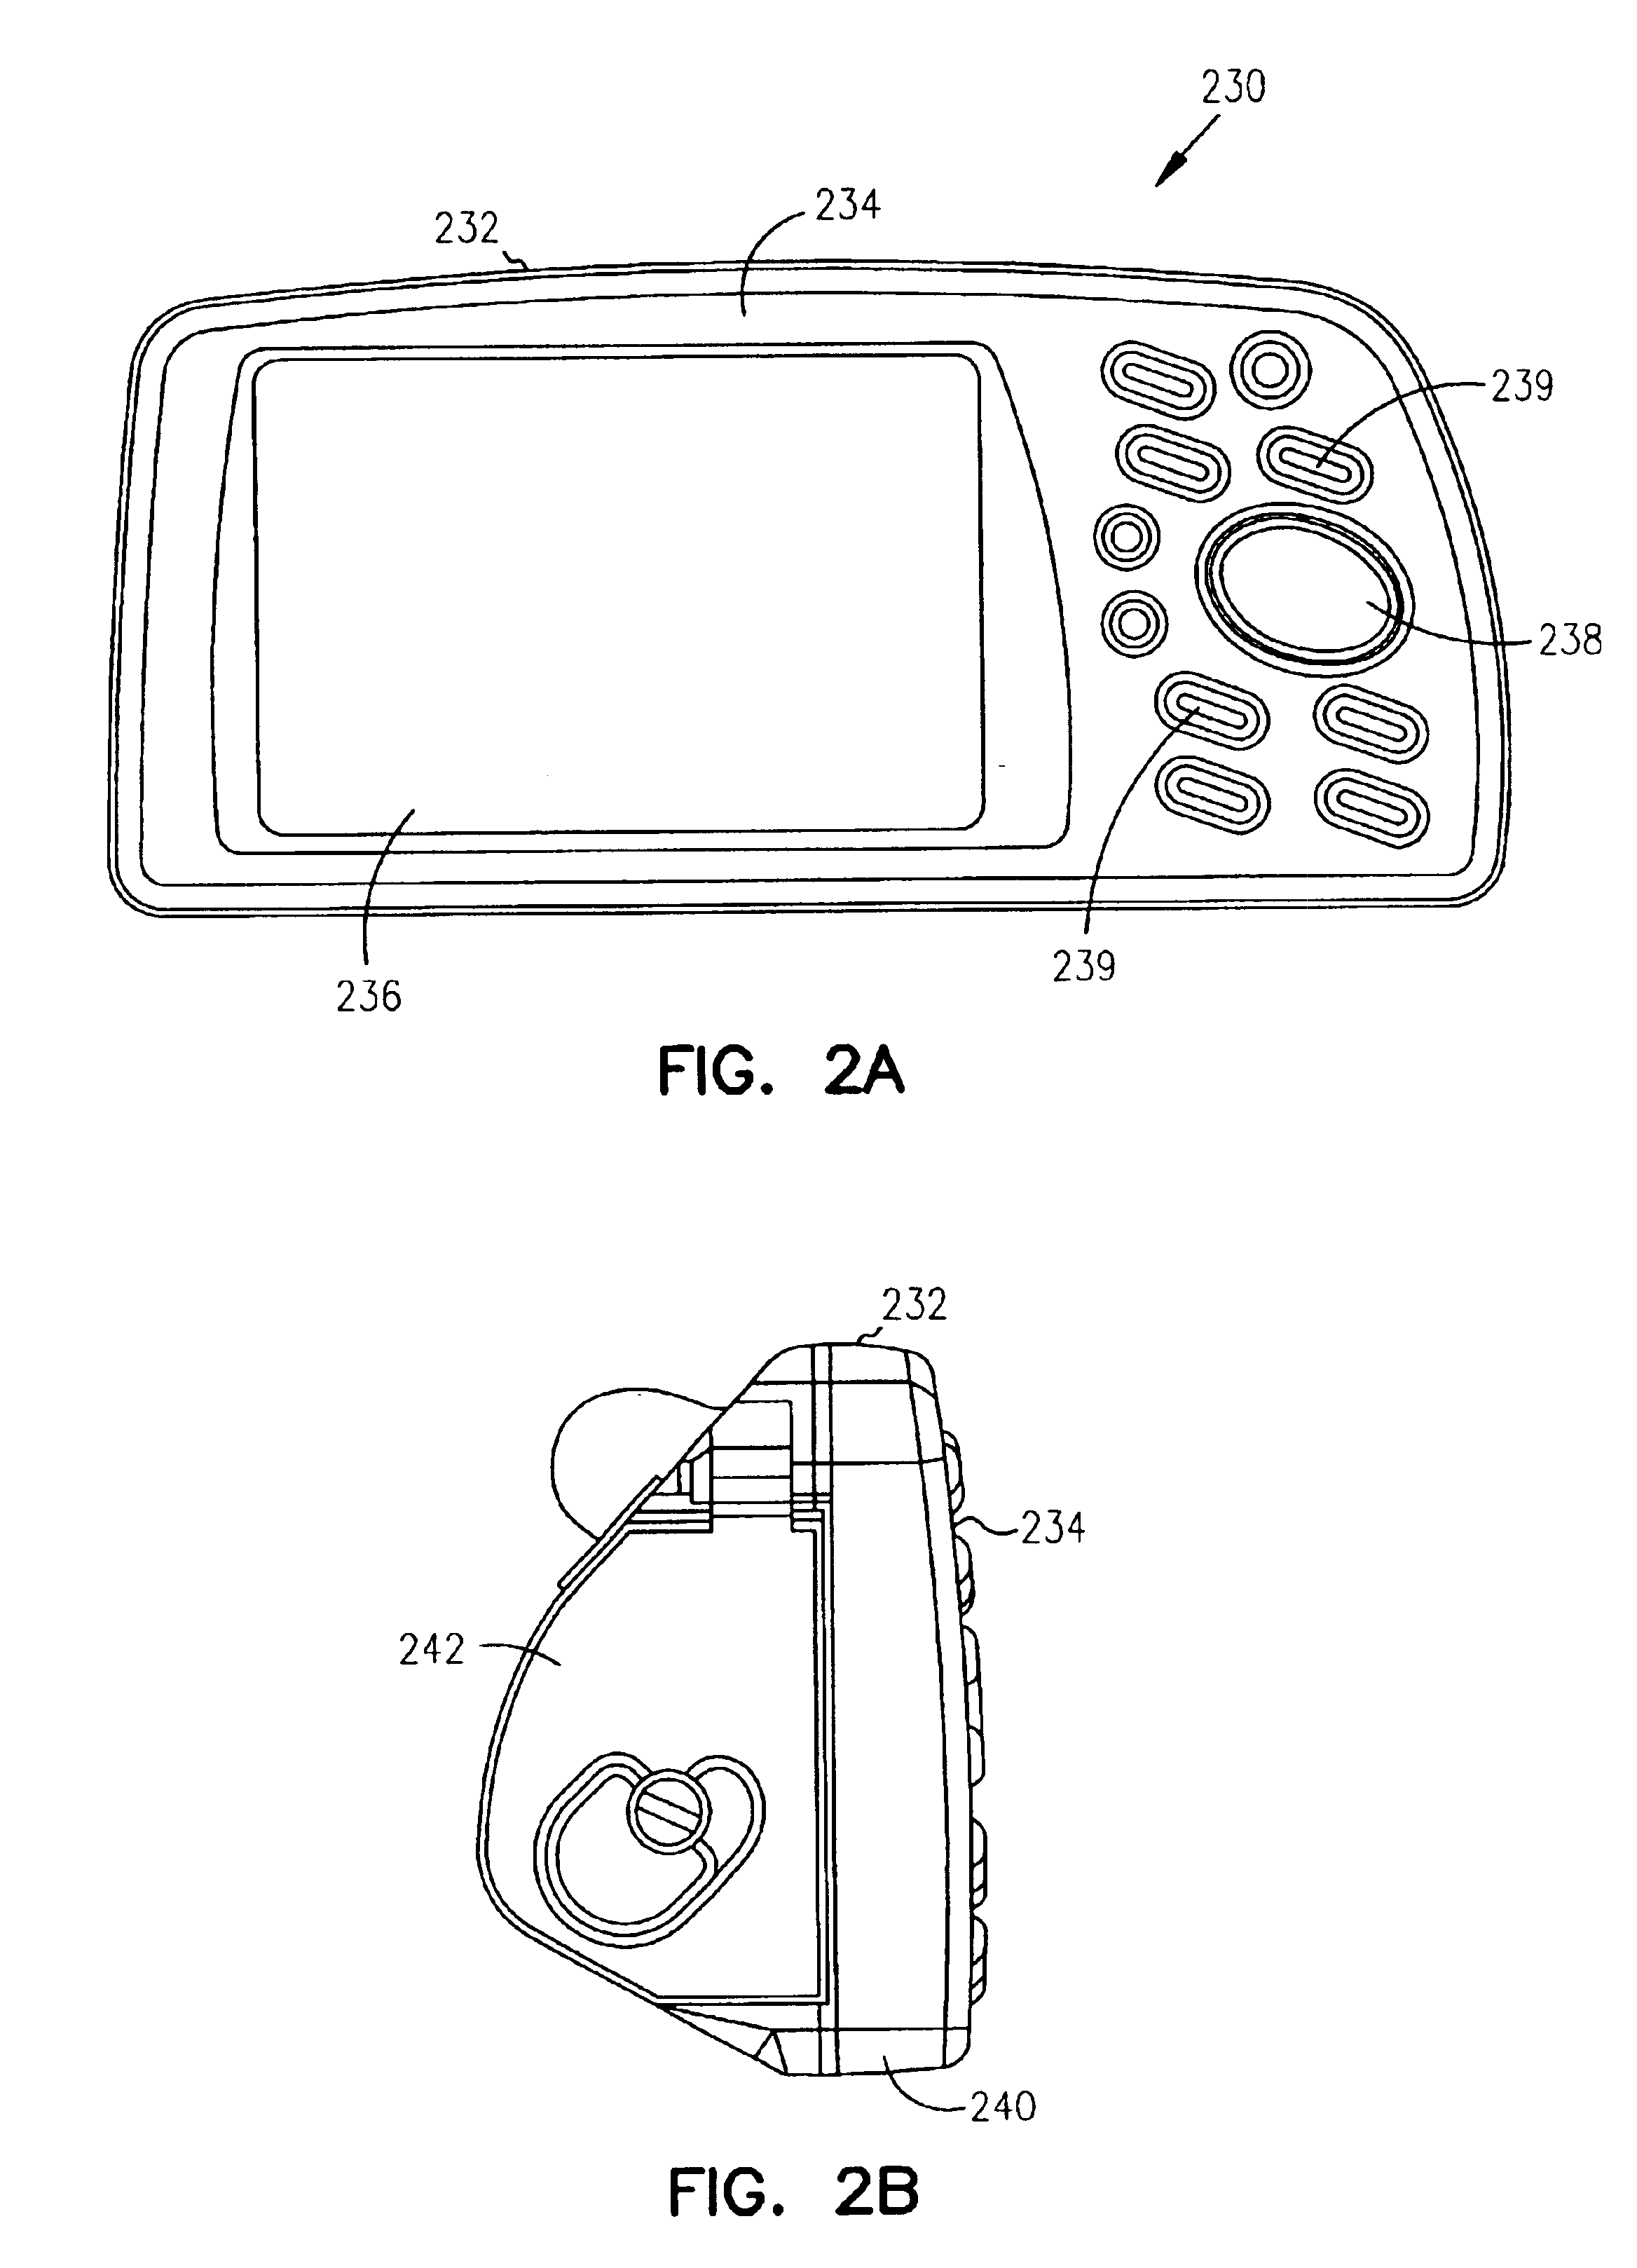 Portable navigation device with integrated GPS and dead reckoning capabilities